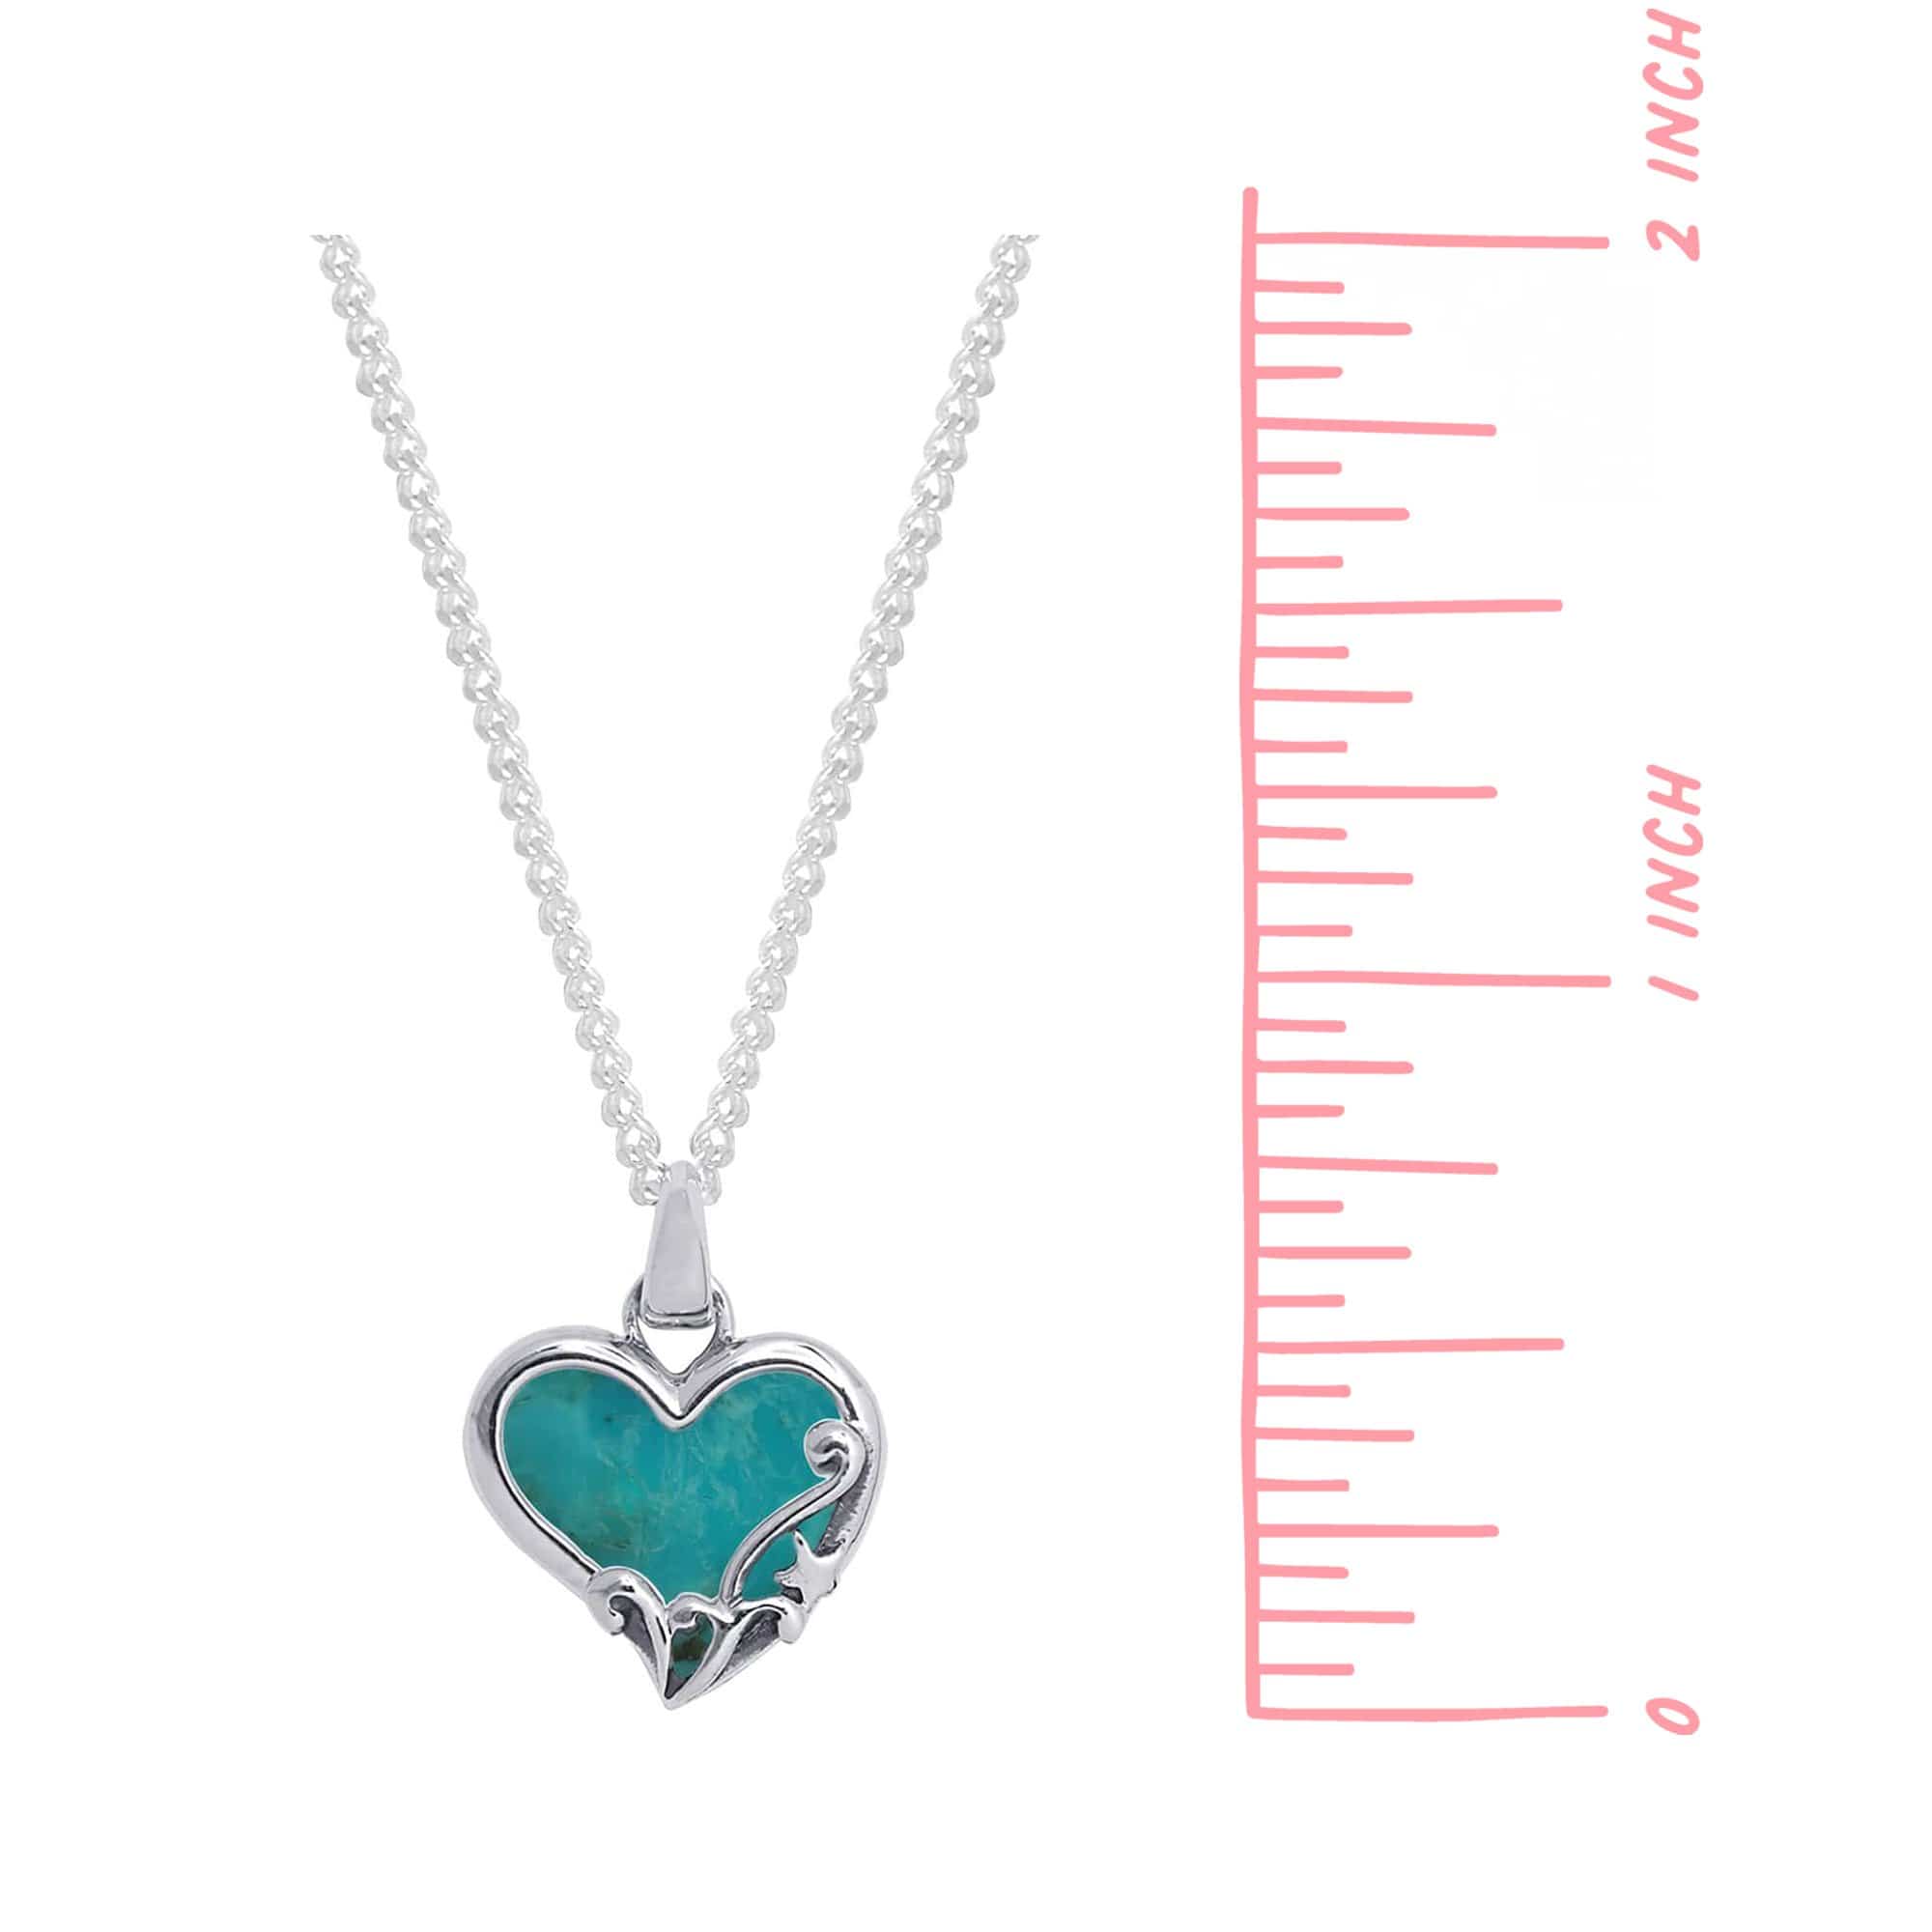 Boma Jewelry Necklaces Turquoise Filigree Heart Necklace